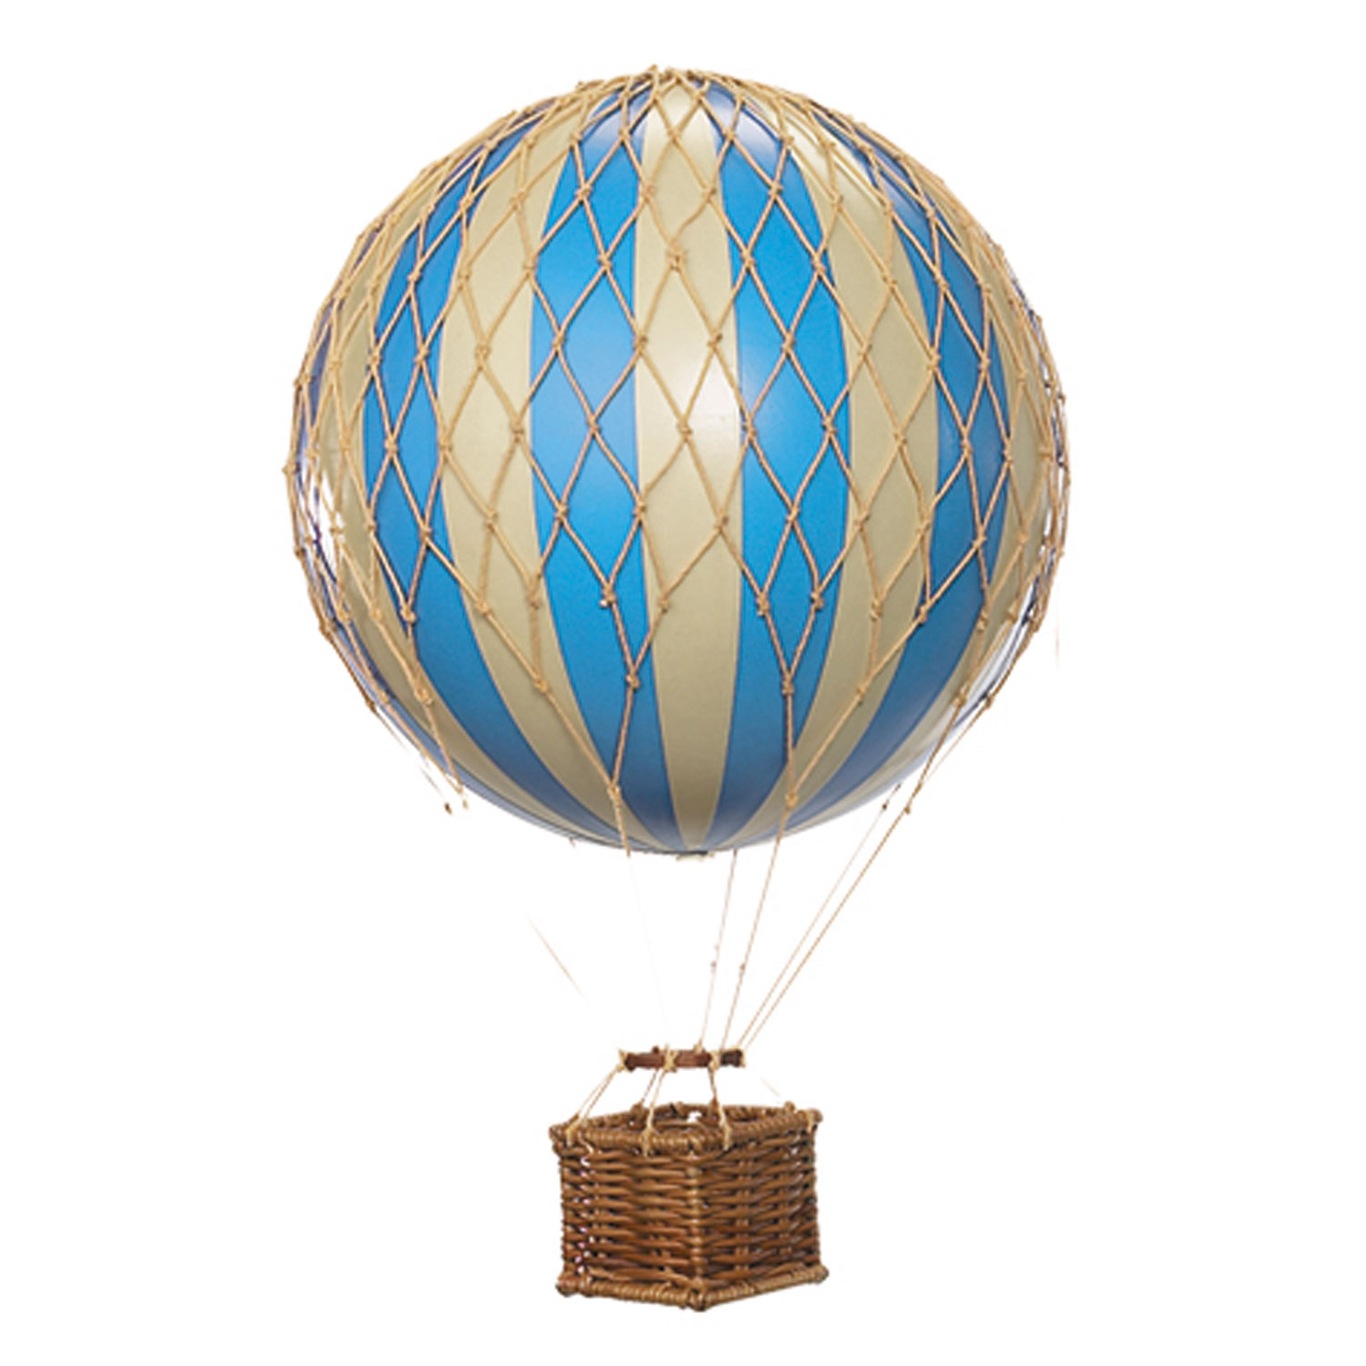 Floating The Skies Luchtballon 13x8.5 cm, Blauw